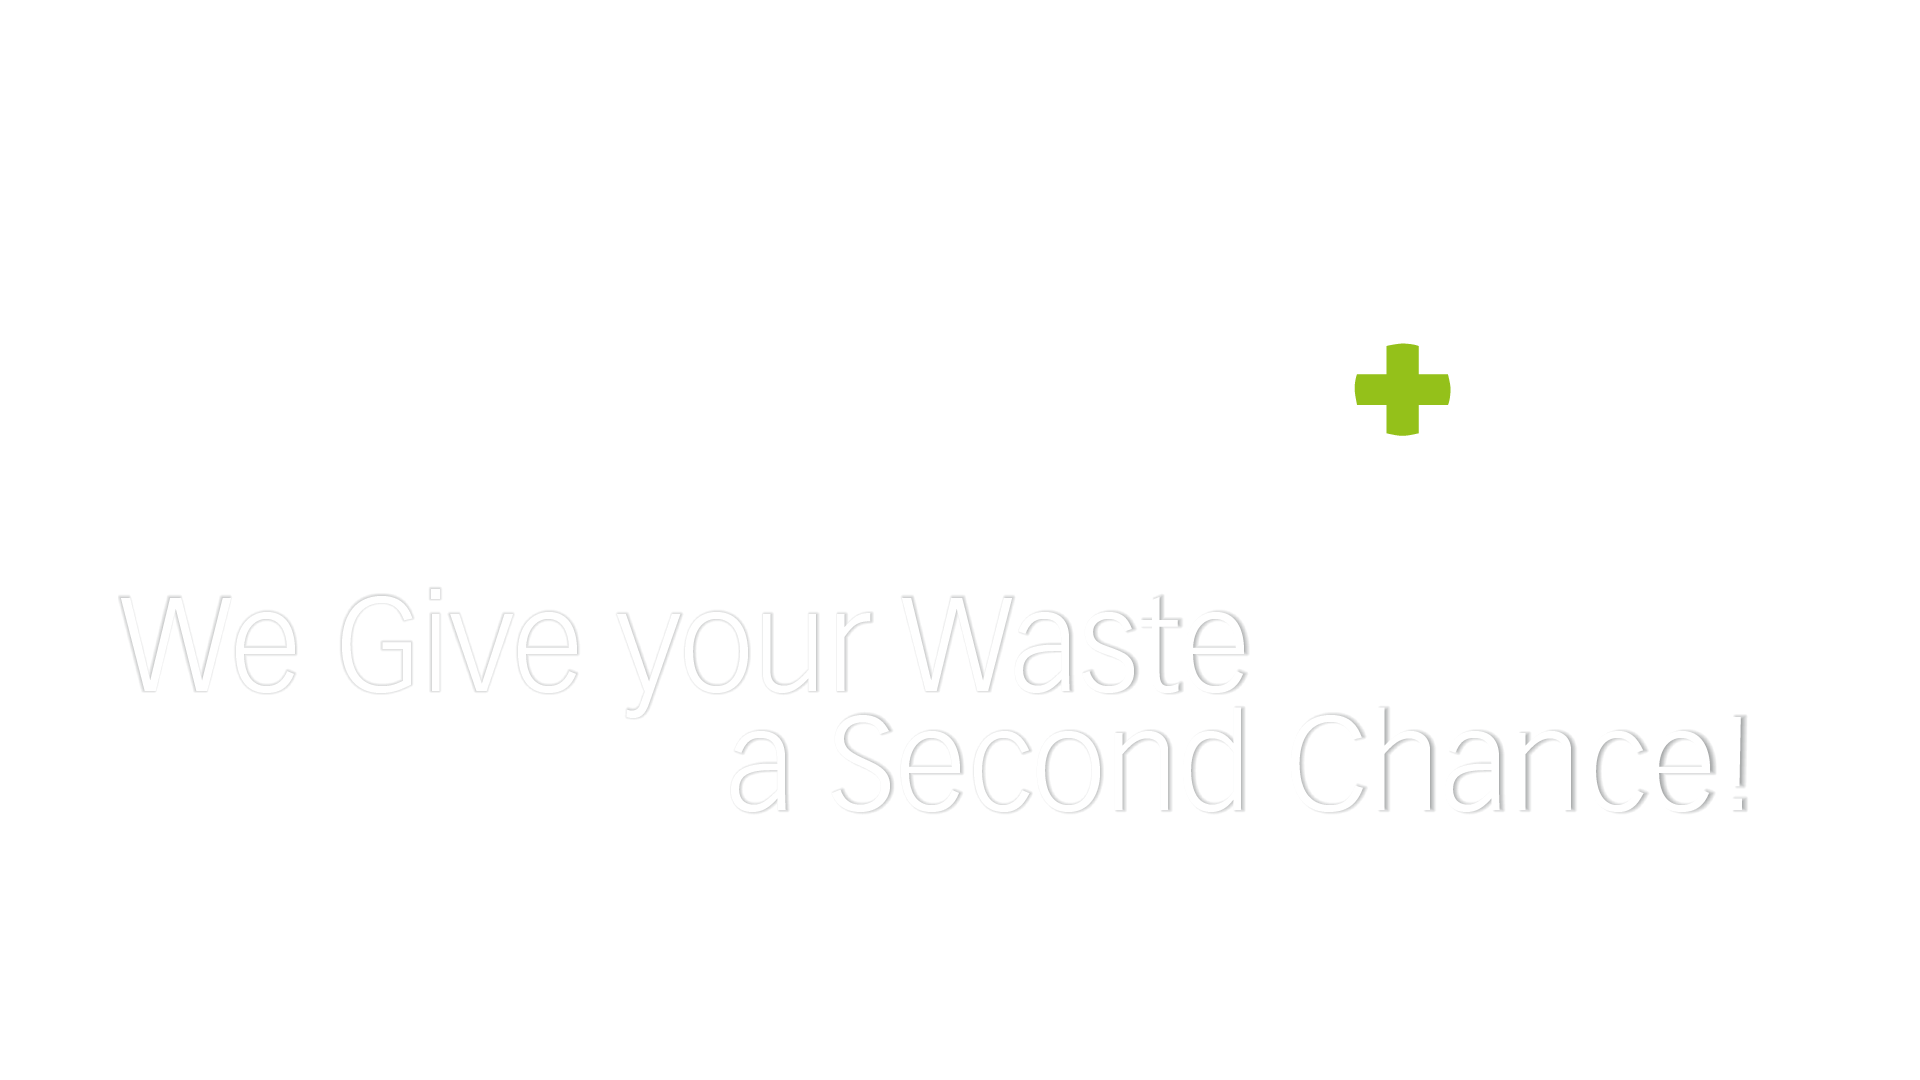 B+T Group – We Give your Waste a Second Chance!